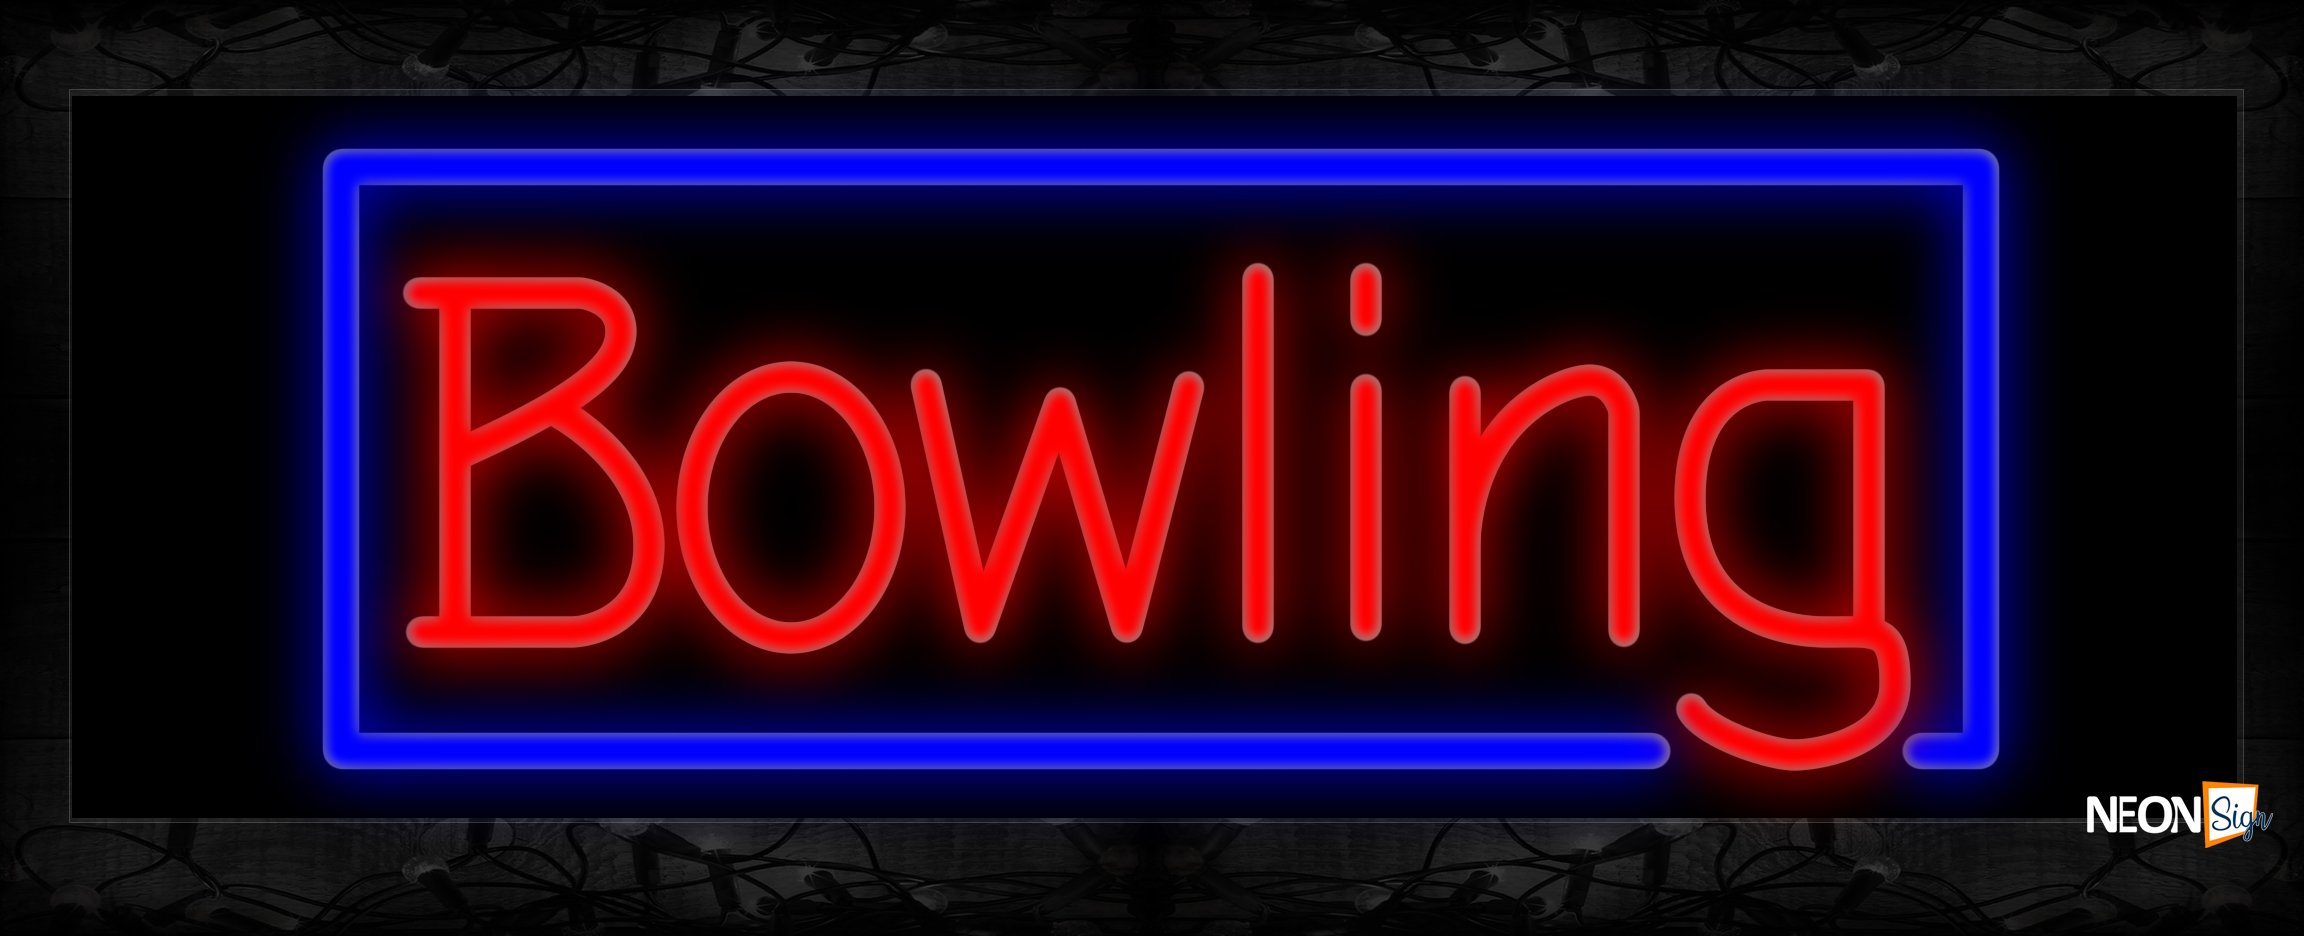 Image of Bowling With Border Neon Sign